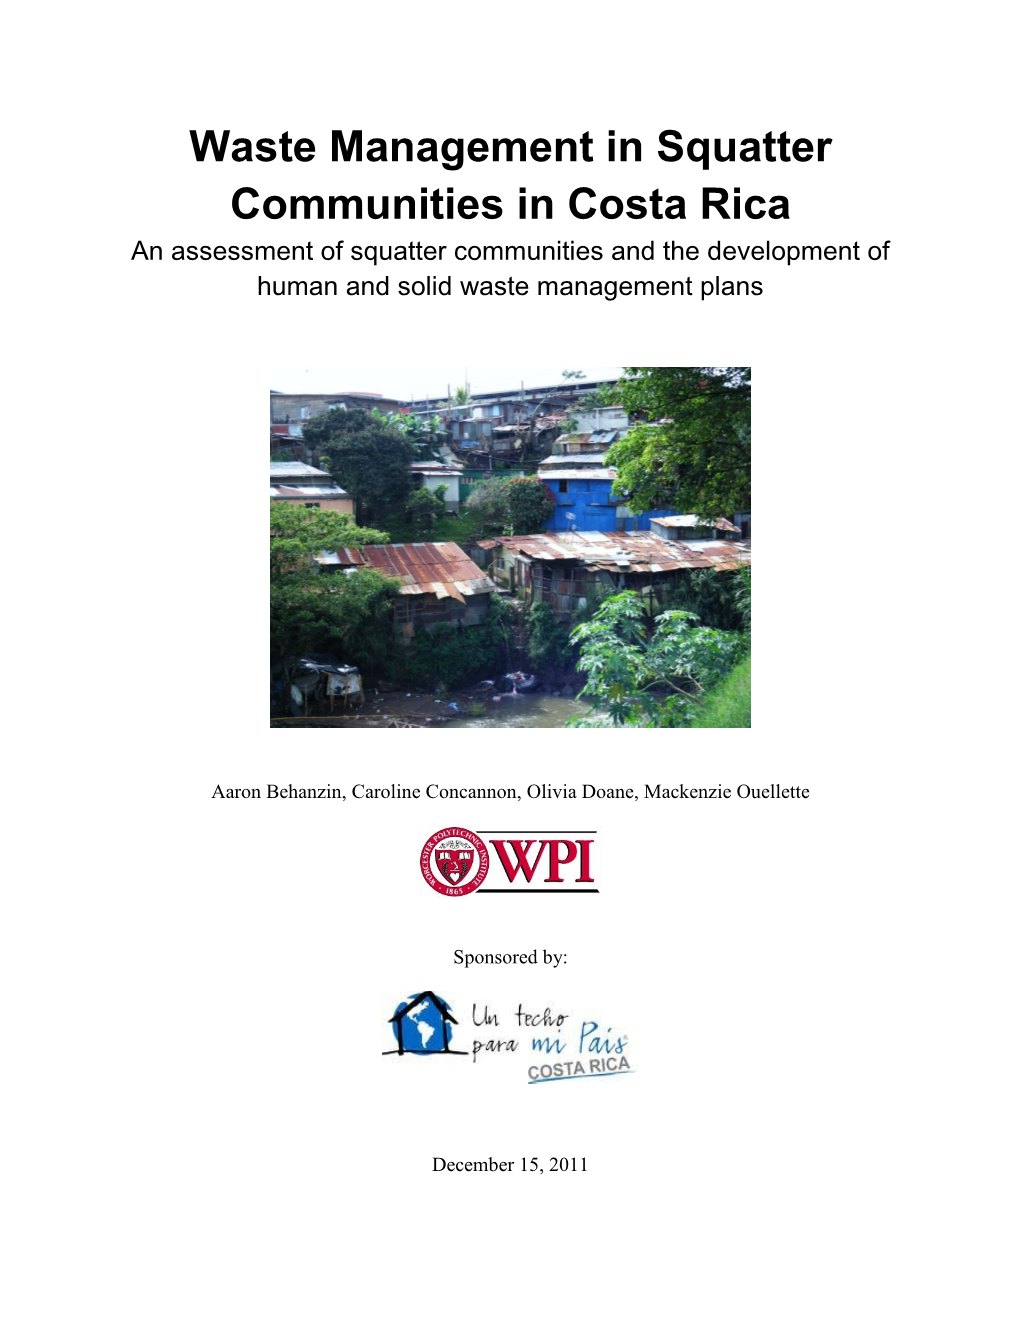 Waste Management in Squatter Communities in Costa Rica an Assessment of Squatter Communities and the Development of Human and Solid Waste Management Plans